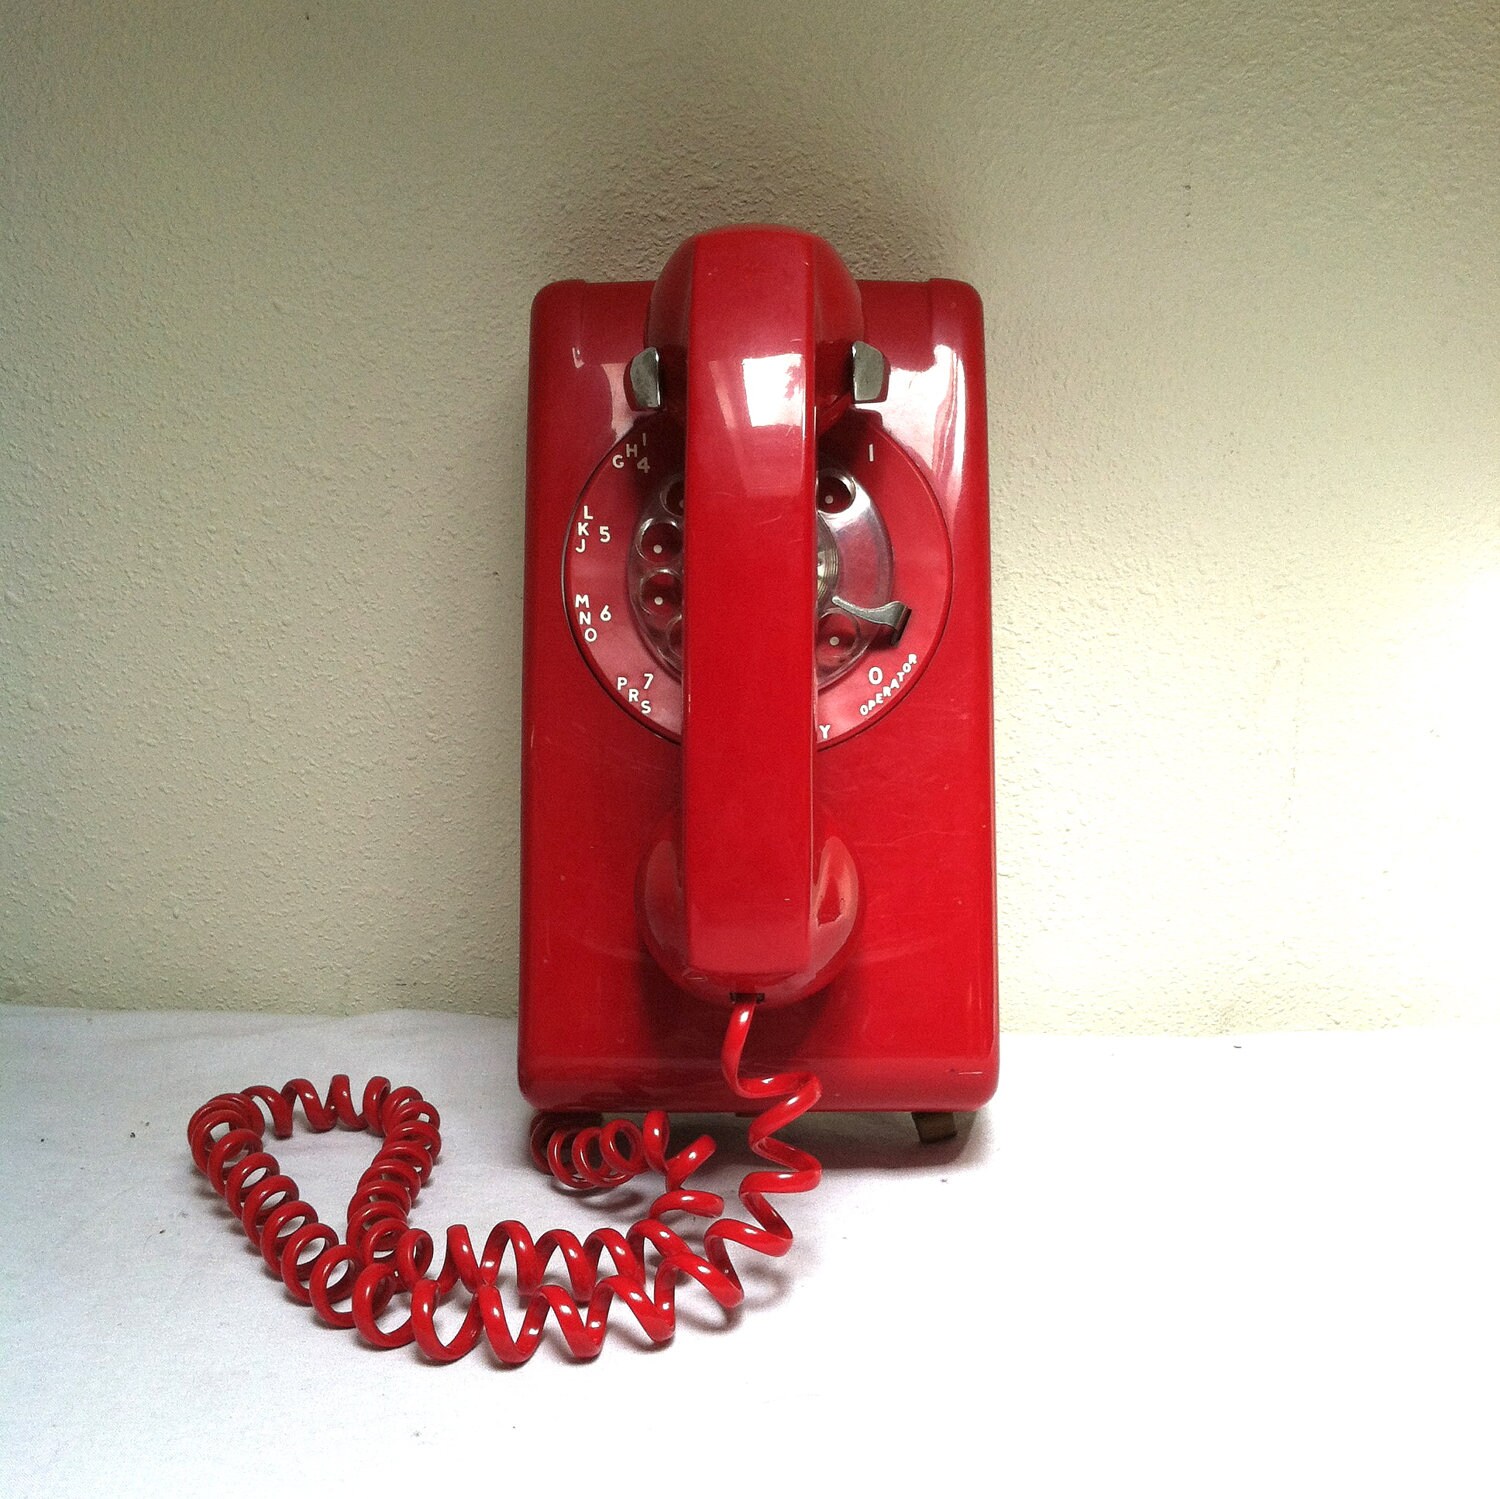 Download Vintage RED ROTARY TELEPHONE / Wall Hanging Phone